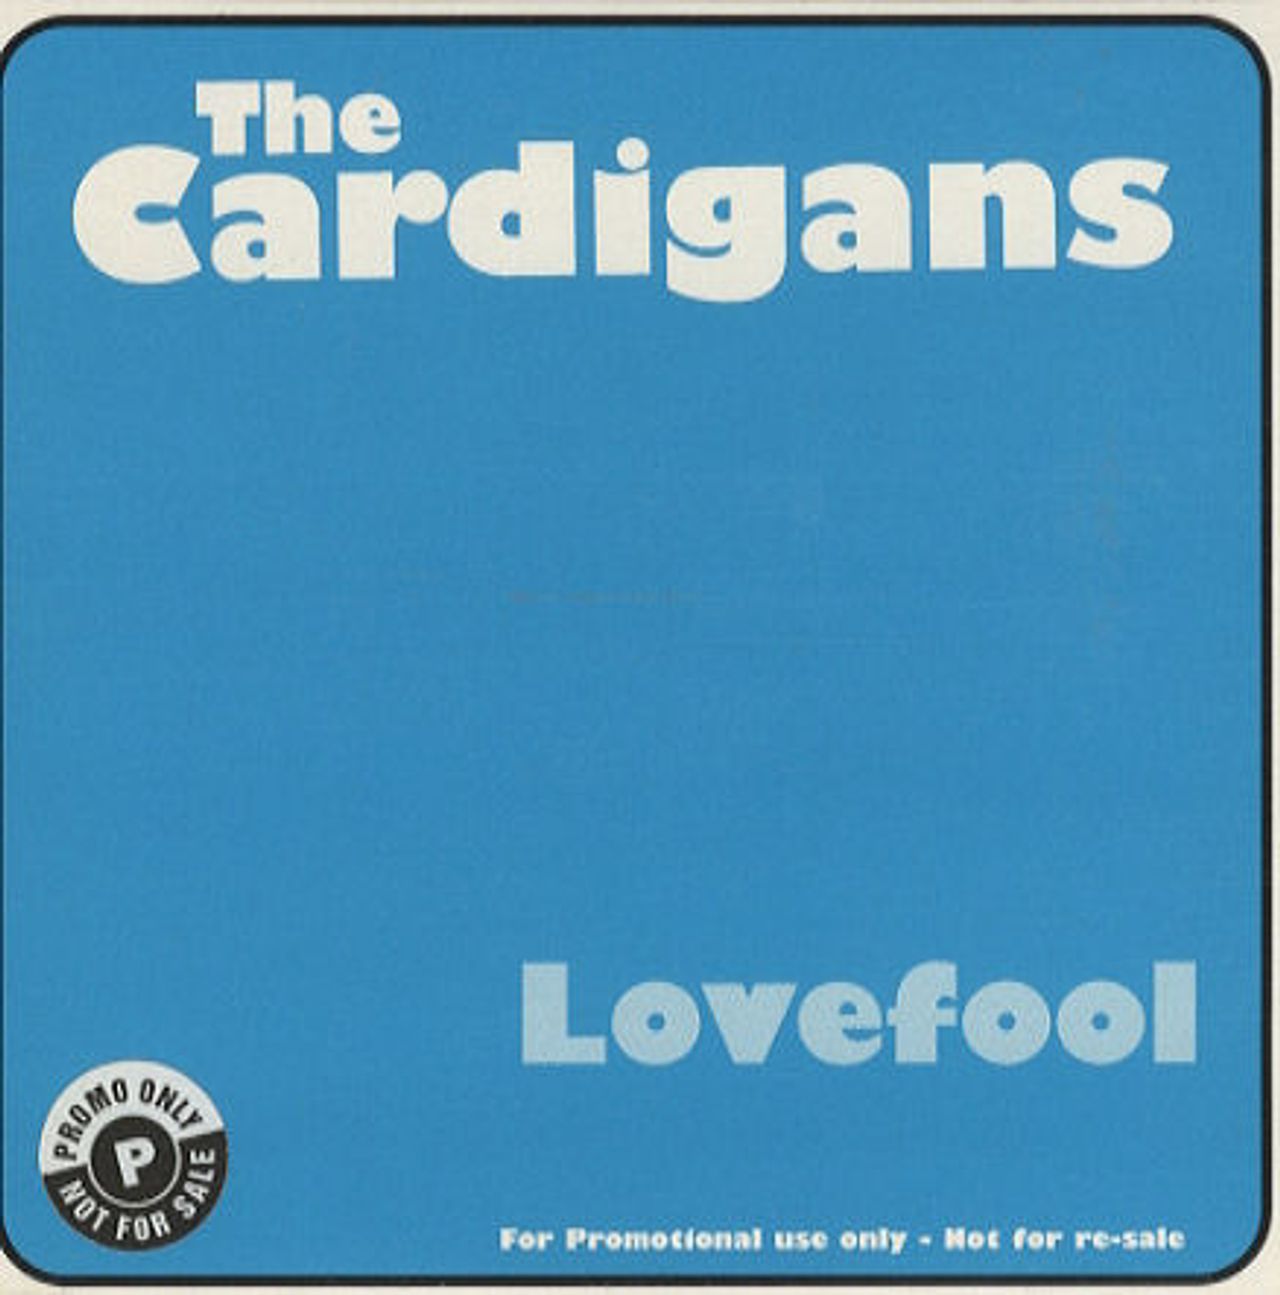 Lovefool текст. The Cardigans Lovefool.